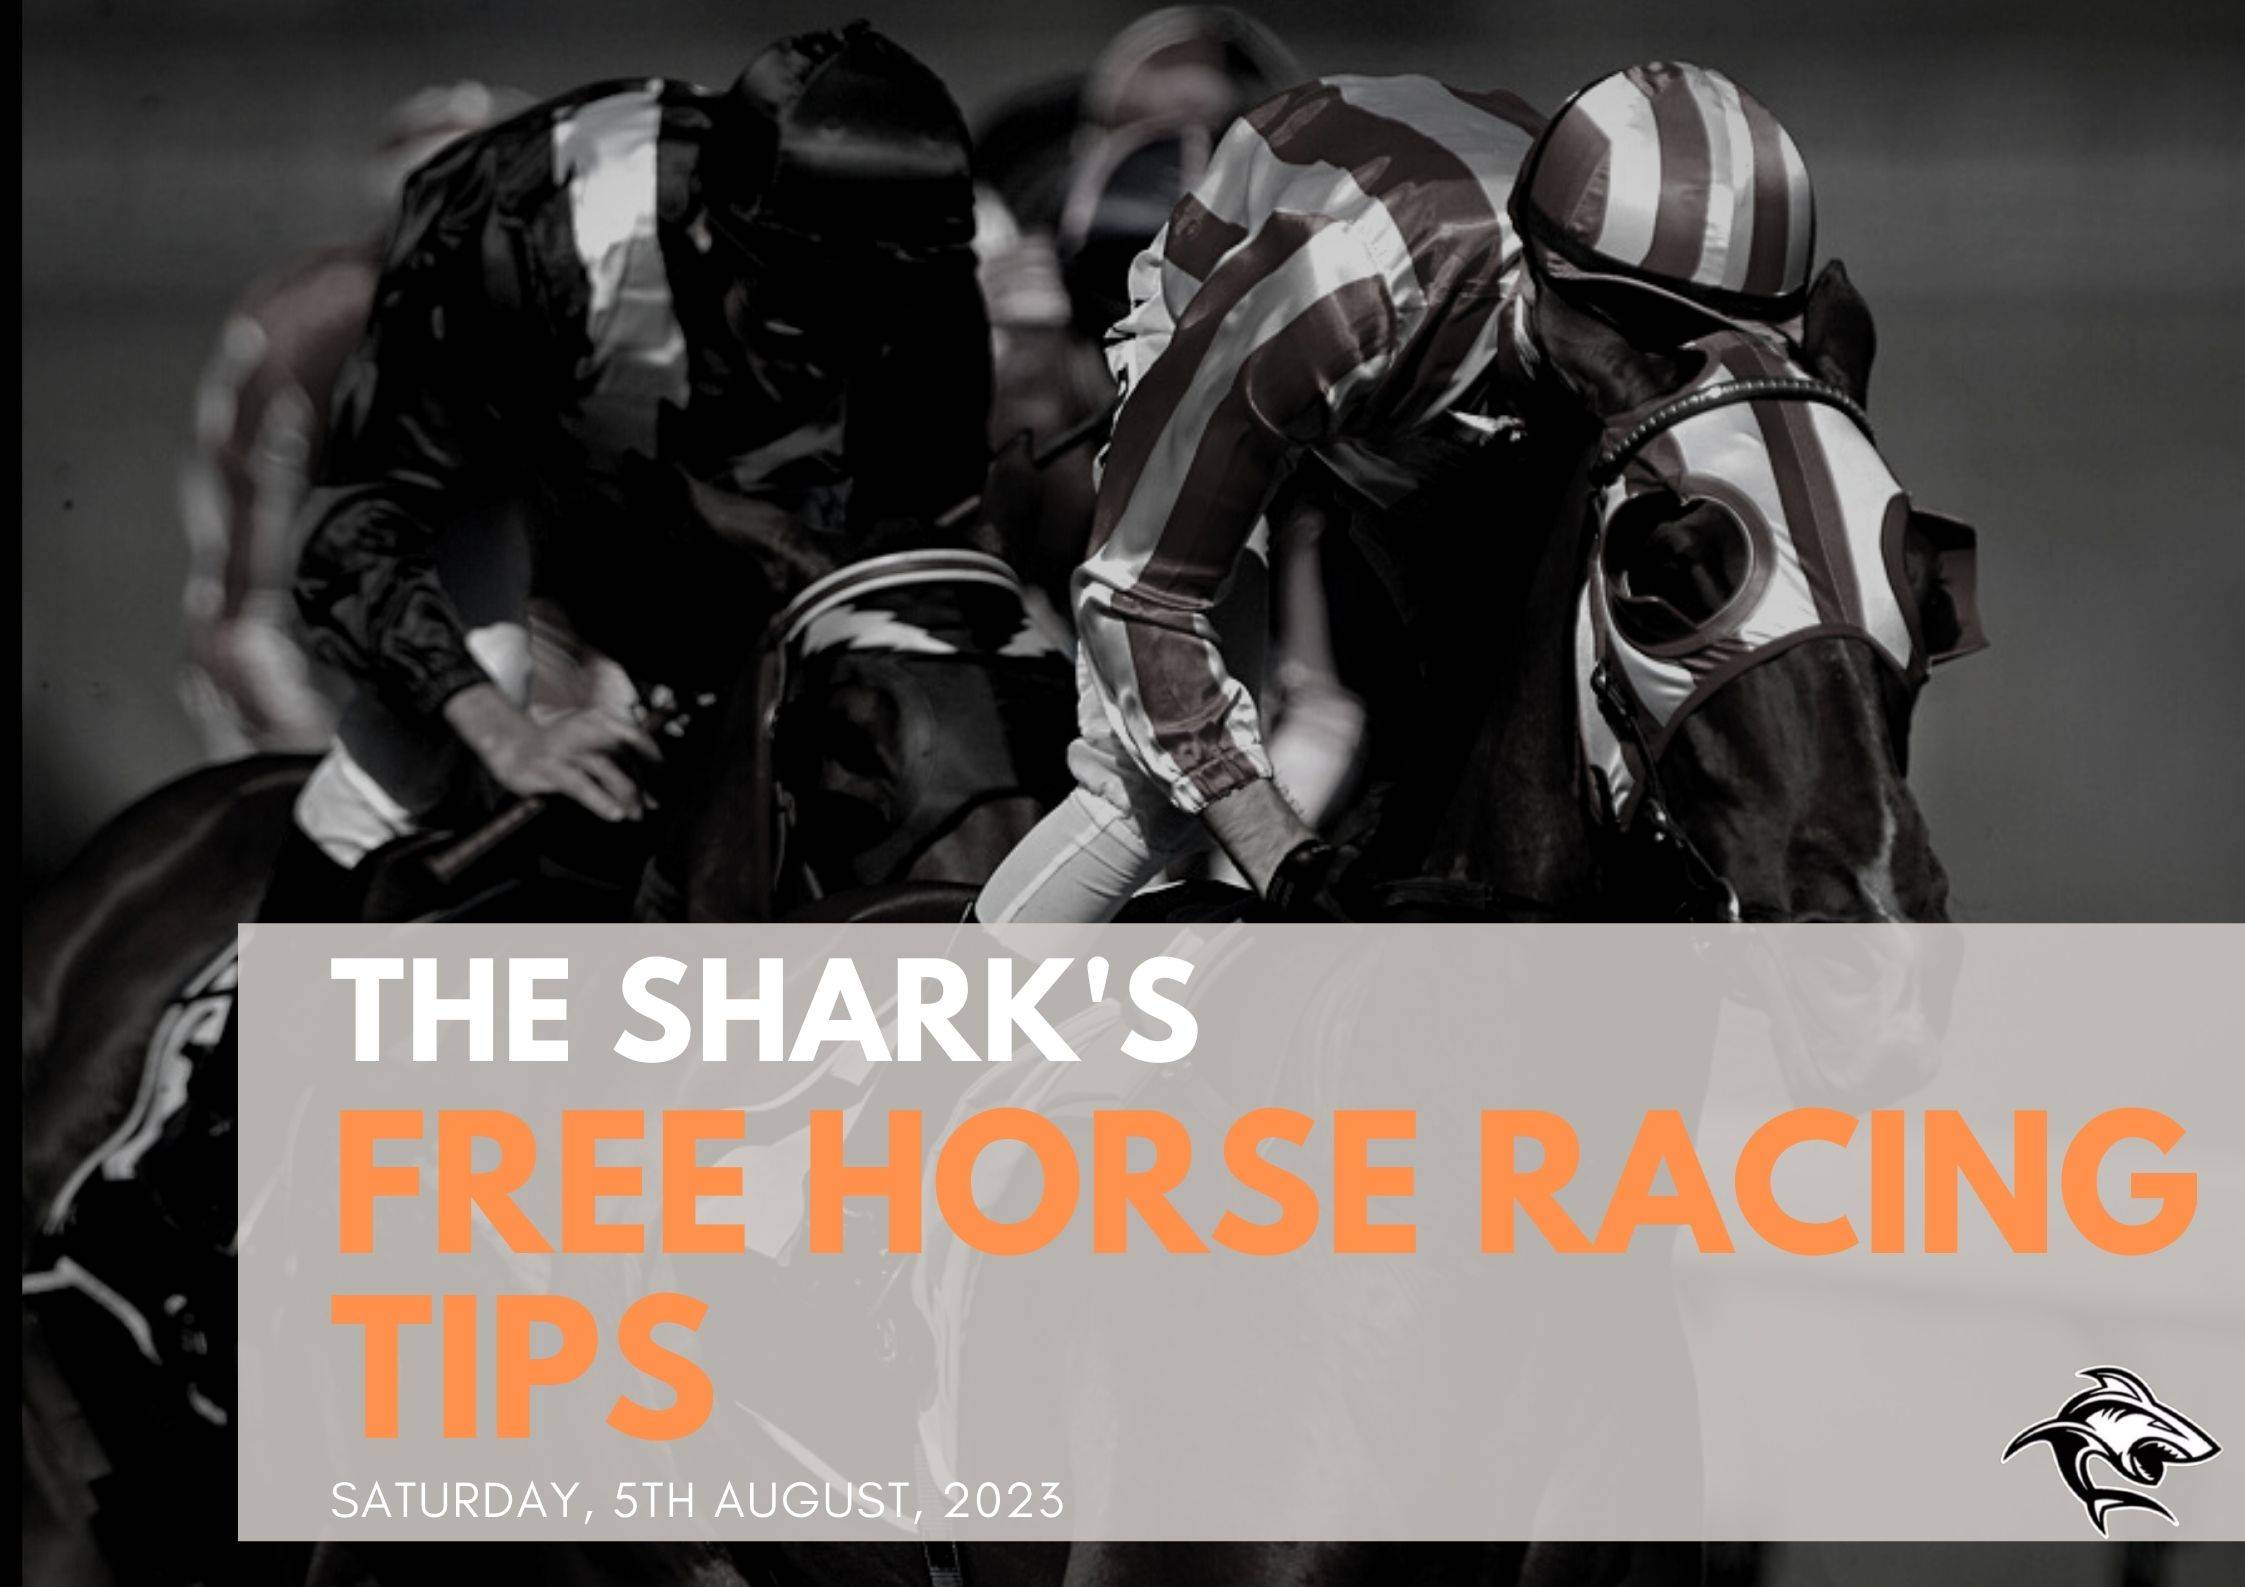 Free Horse Racing Tips - 5th Aug